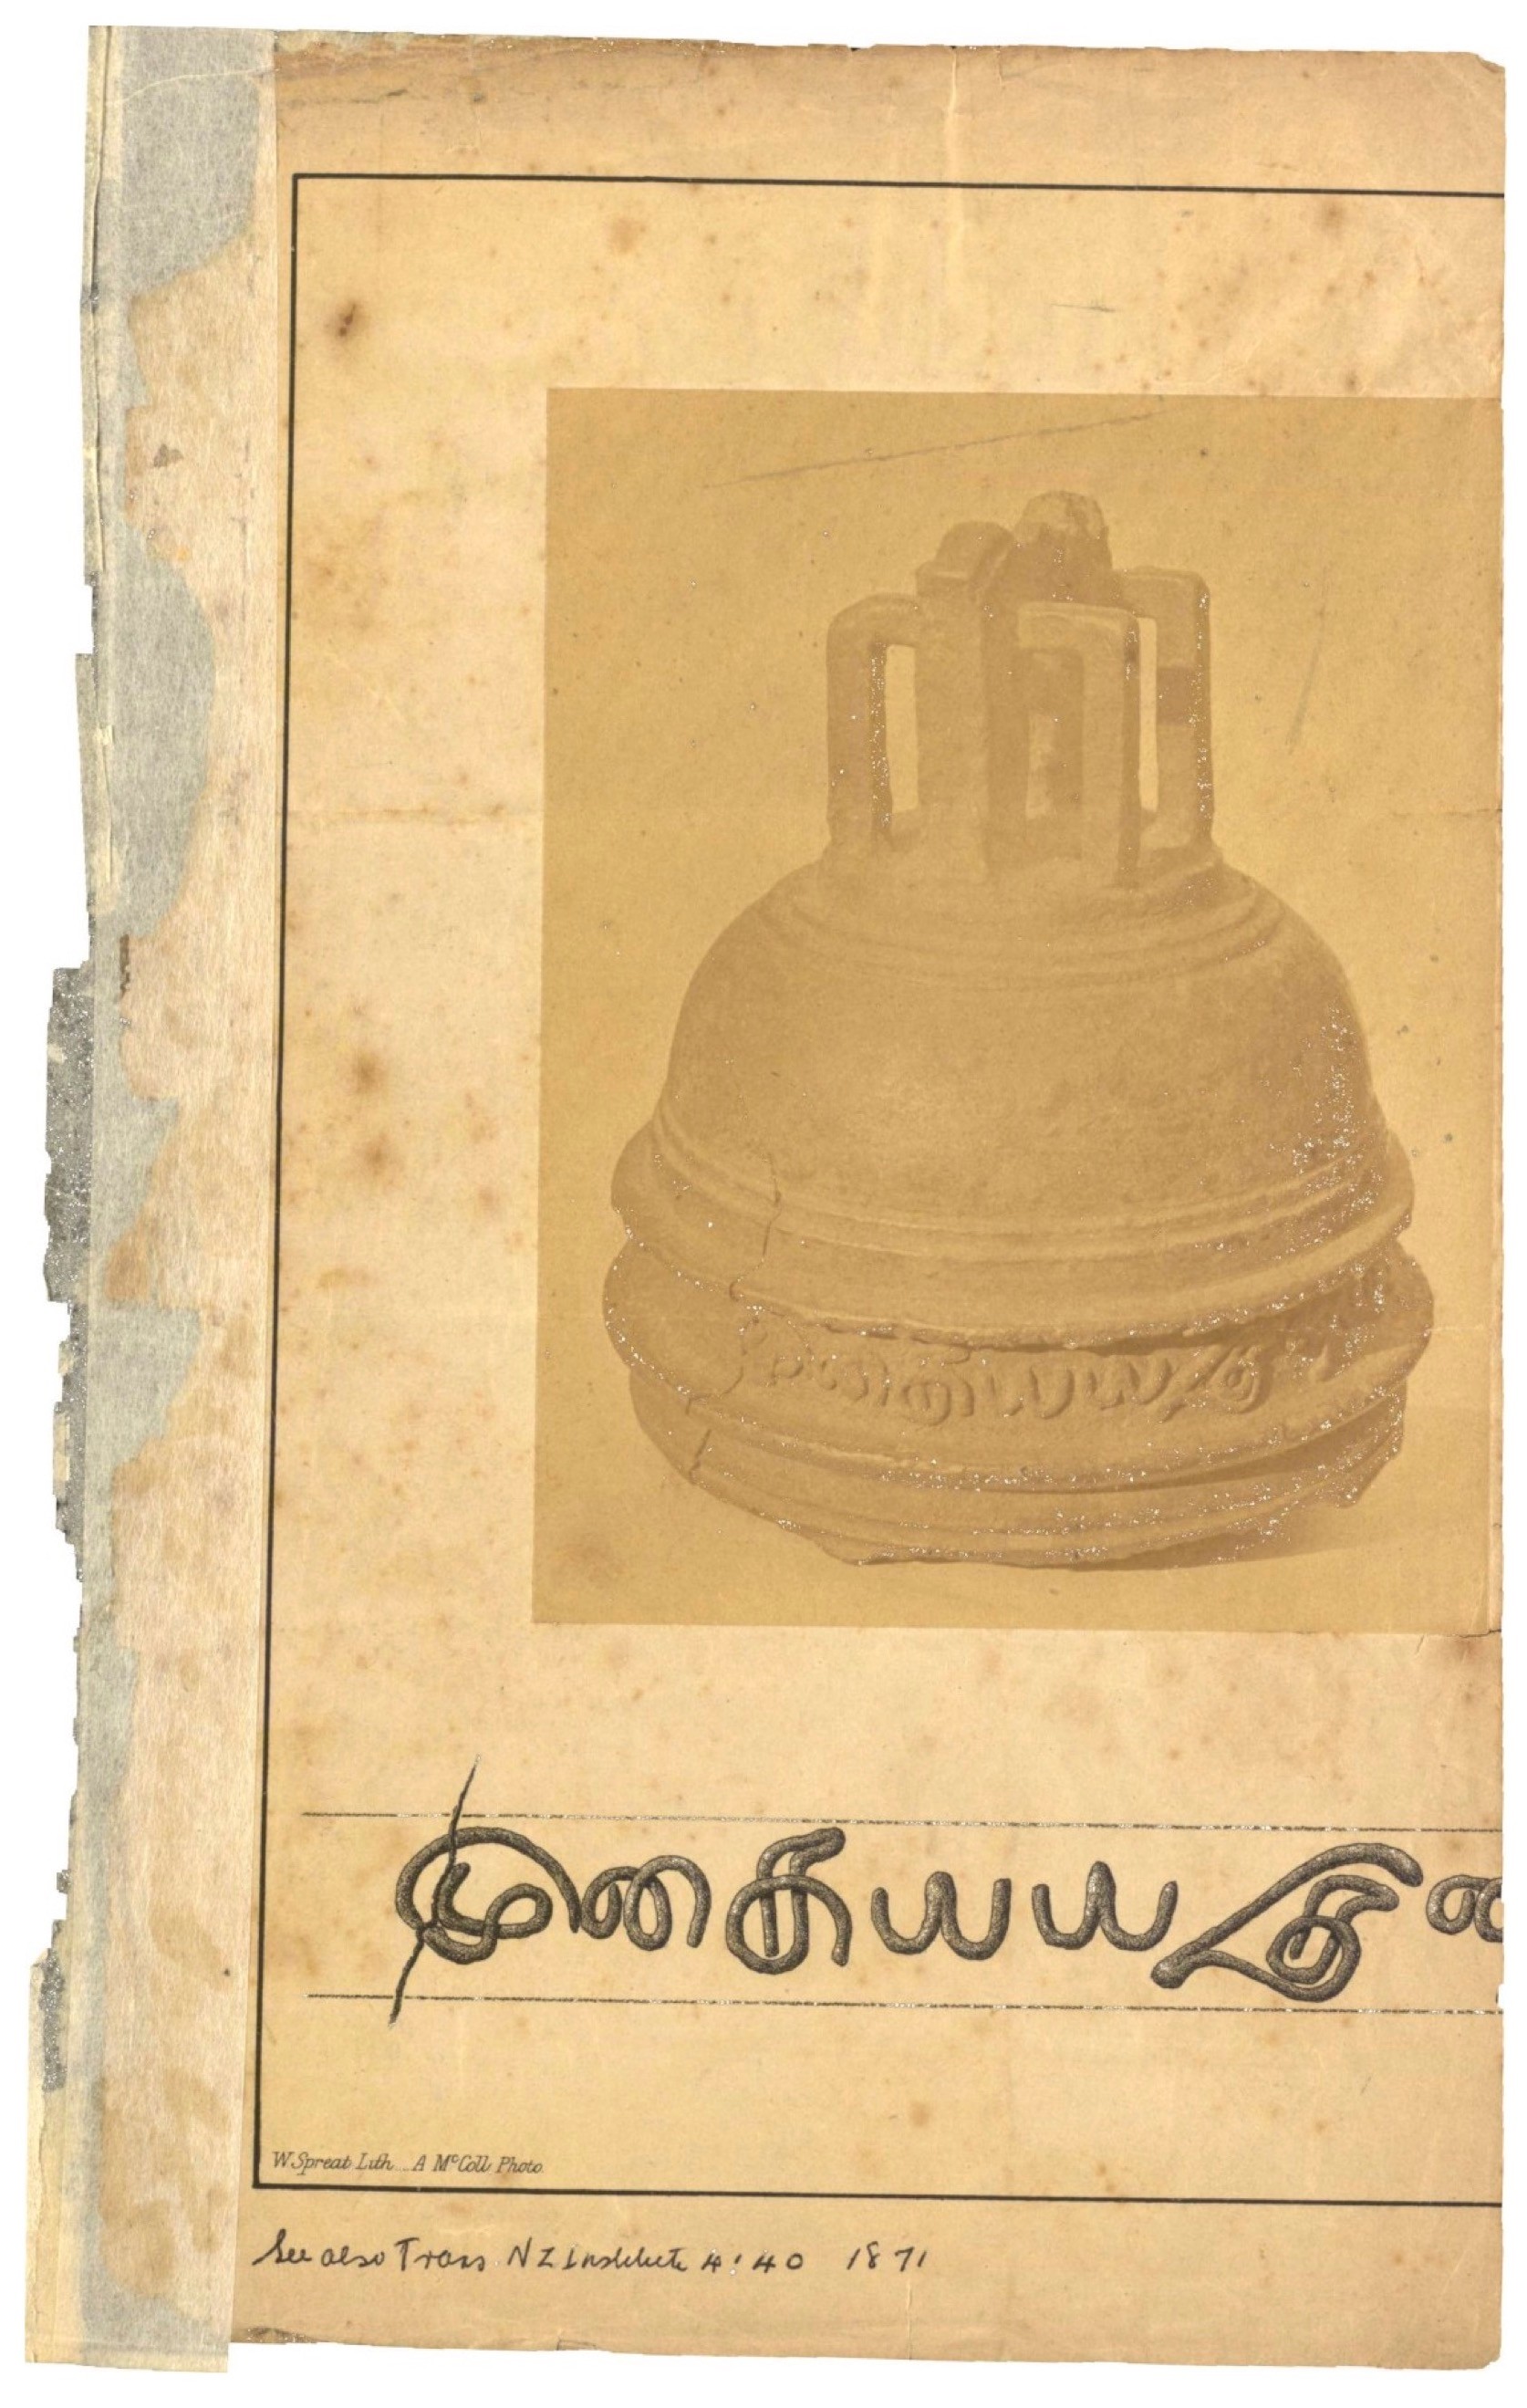 Torn and yellowed page with a picture of a bell and a transcription of the engraving on the bell.